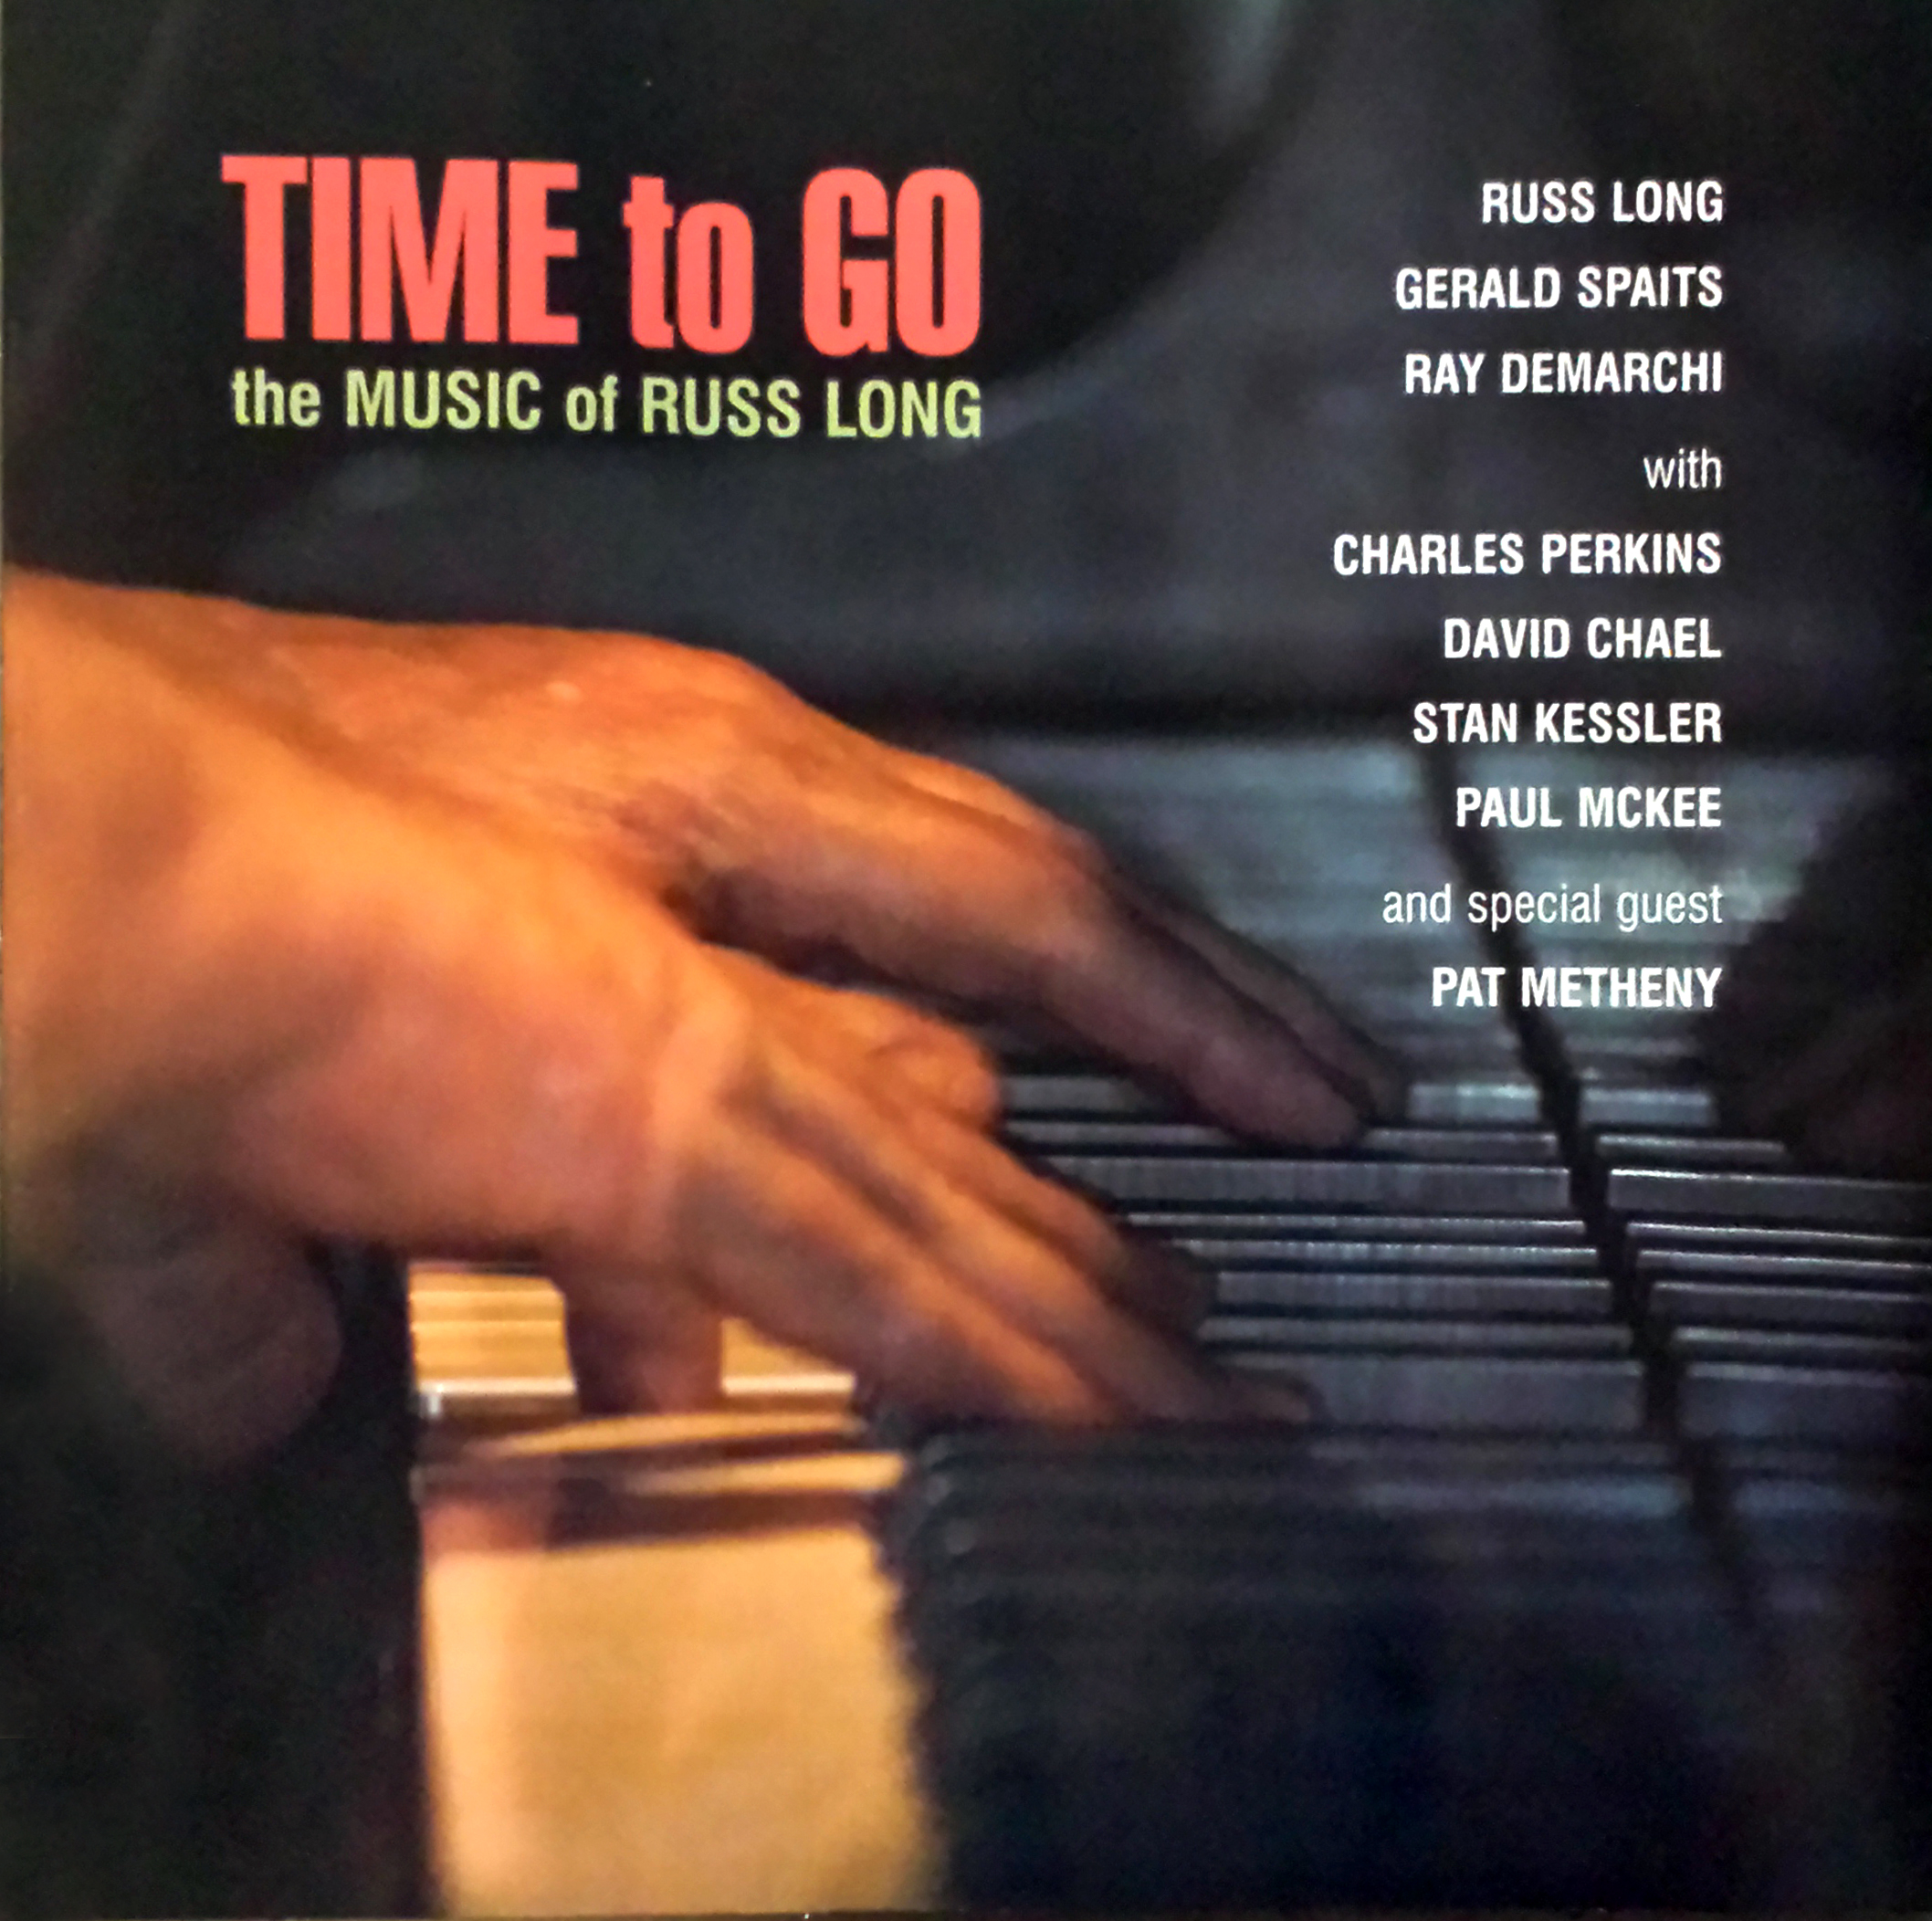 Russ Long Time to Go the music of Russ Long